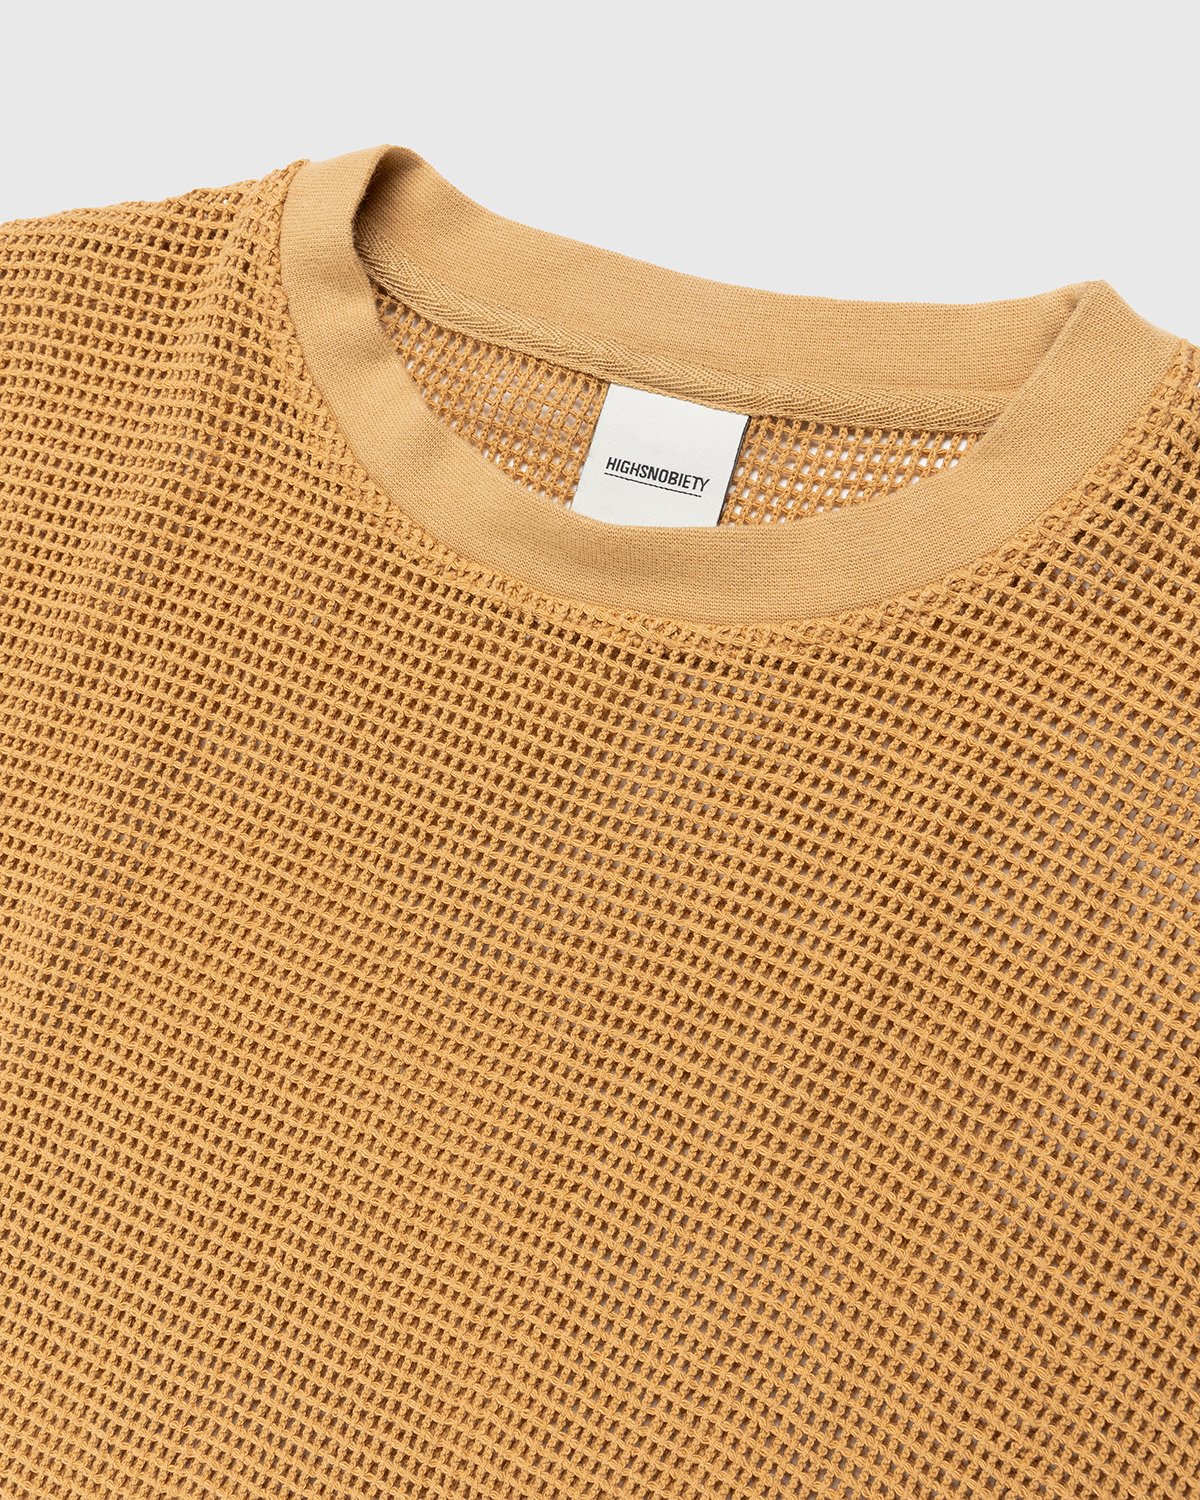 Highsnobiety - Knit Mesh Jersey T-Shirt Brown - Clothing - Brown - Image 3